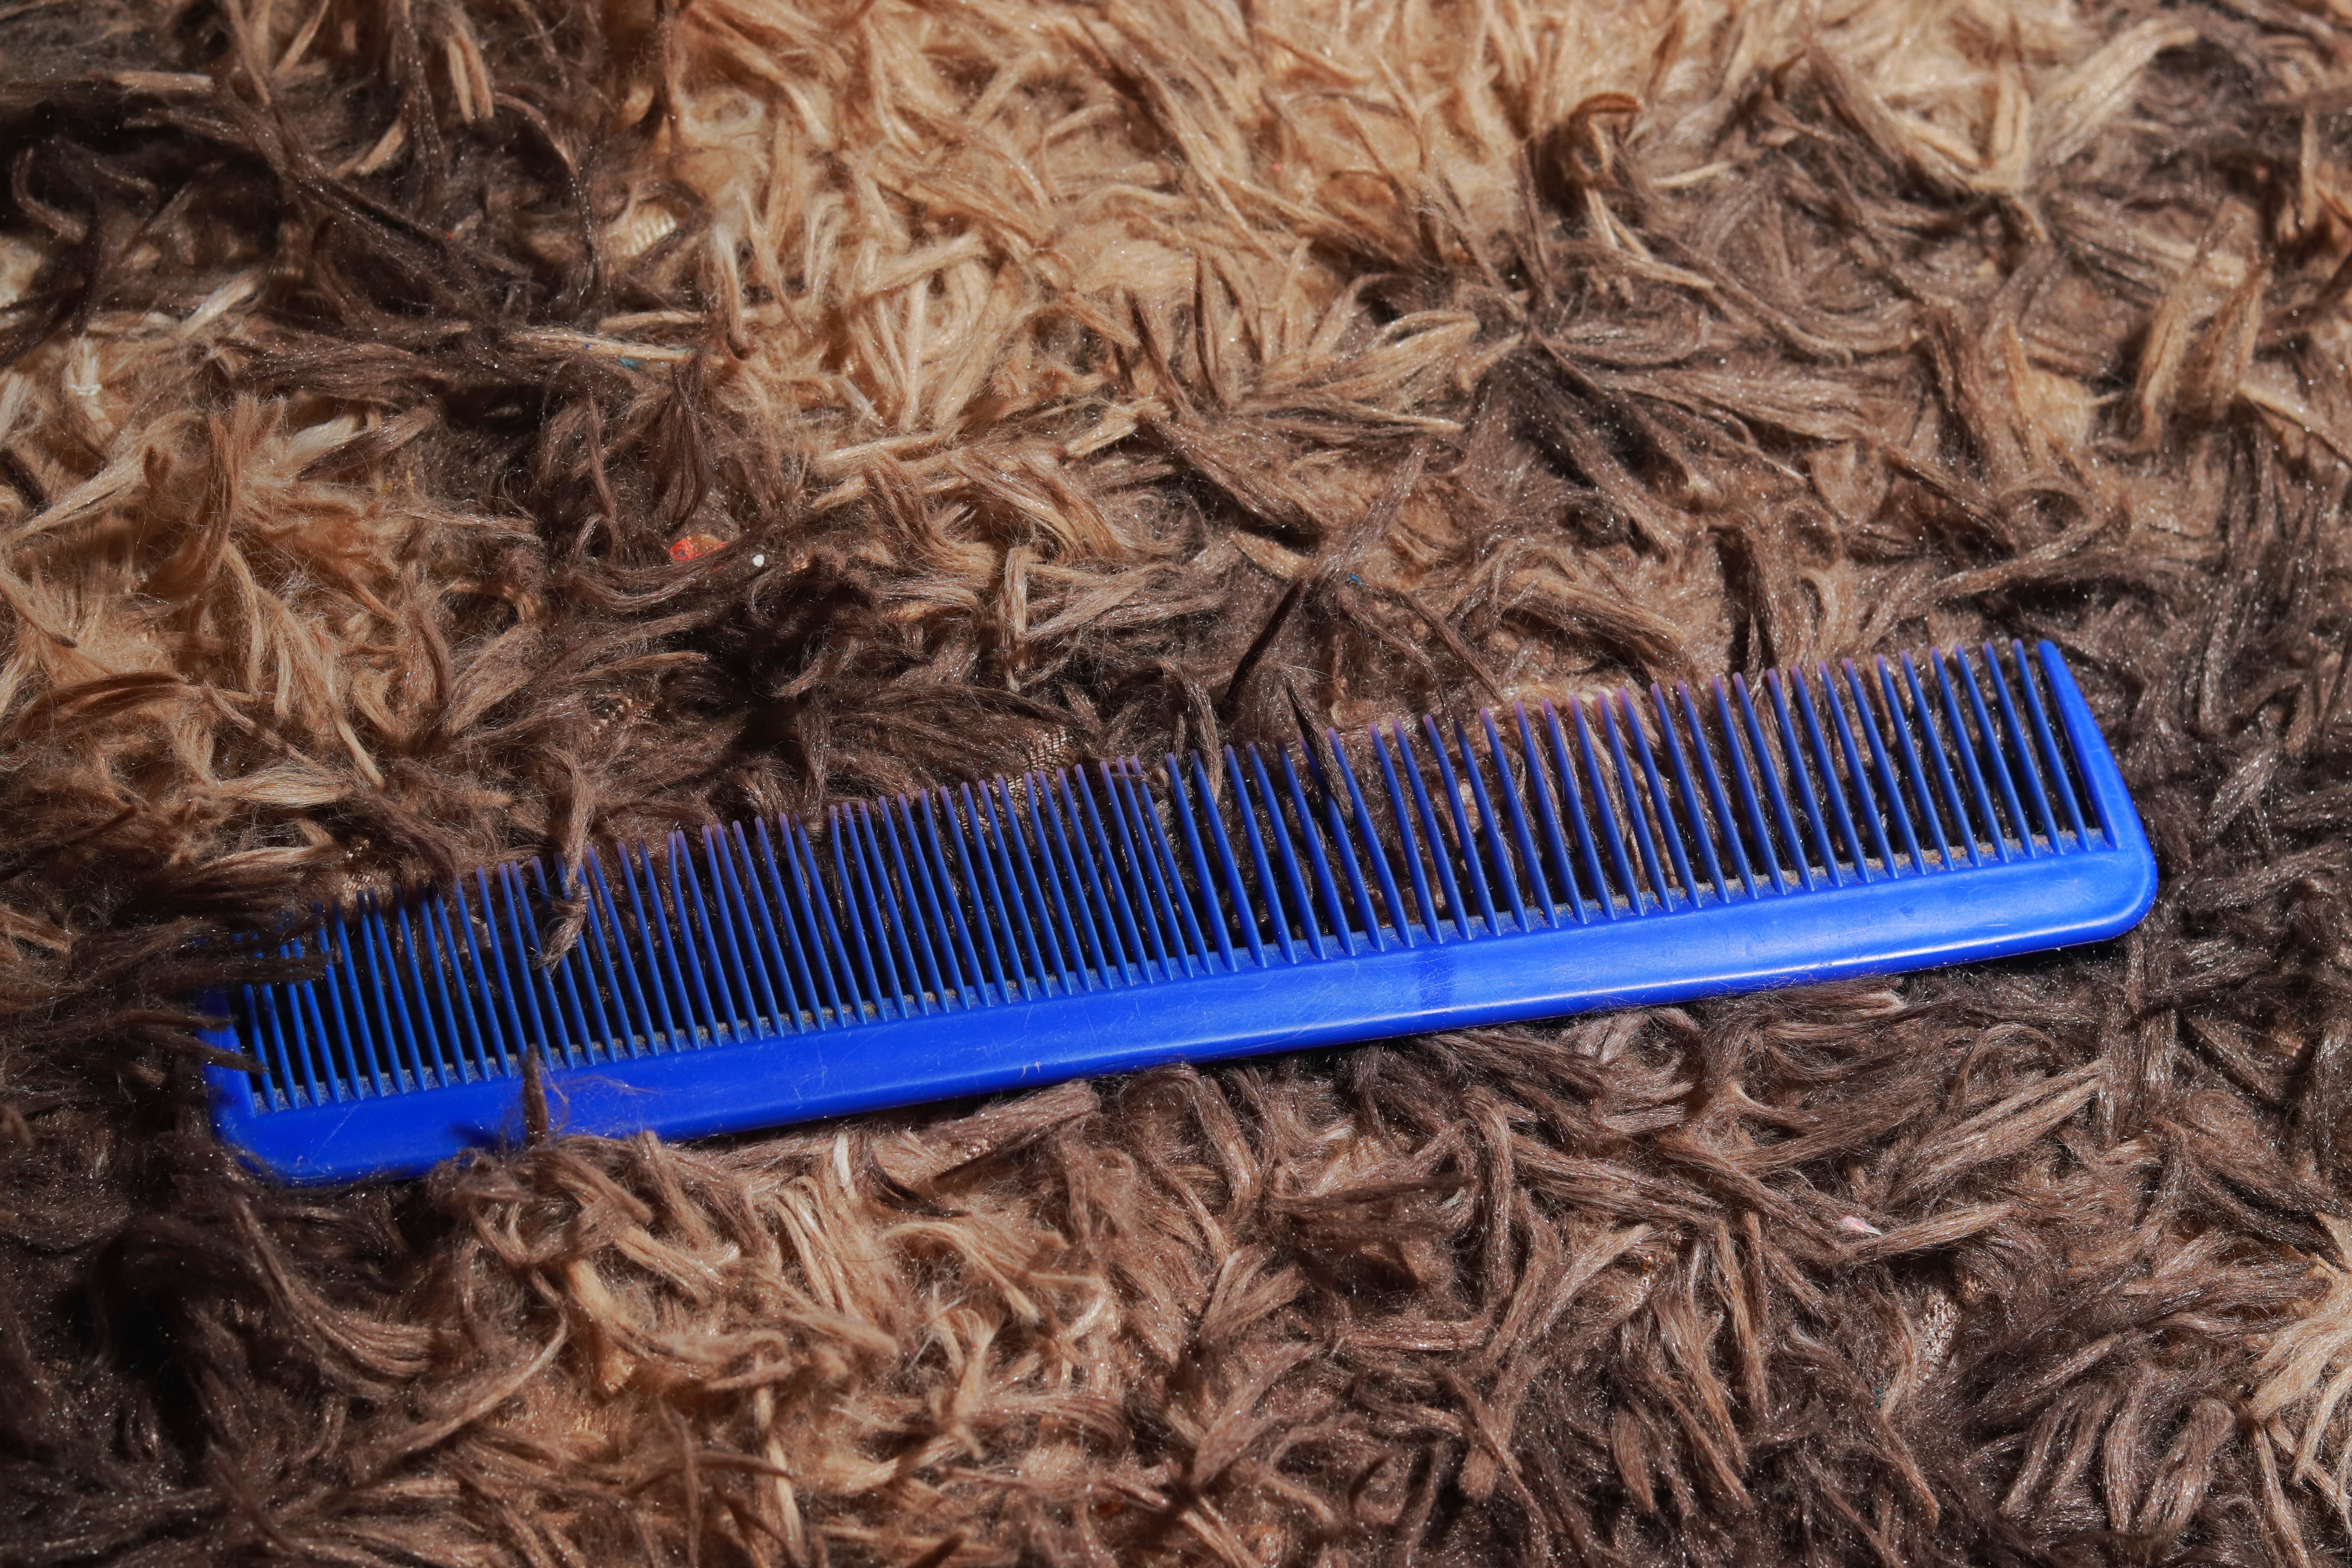 A comb placed over a faux fur rug | Source: Getty Images